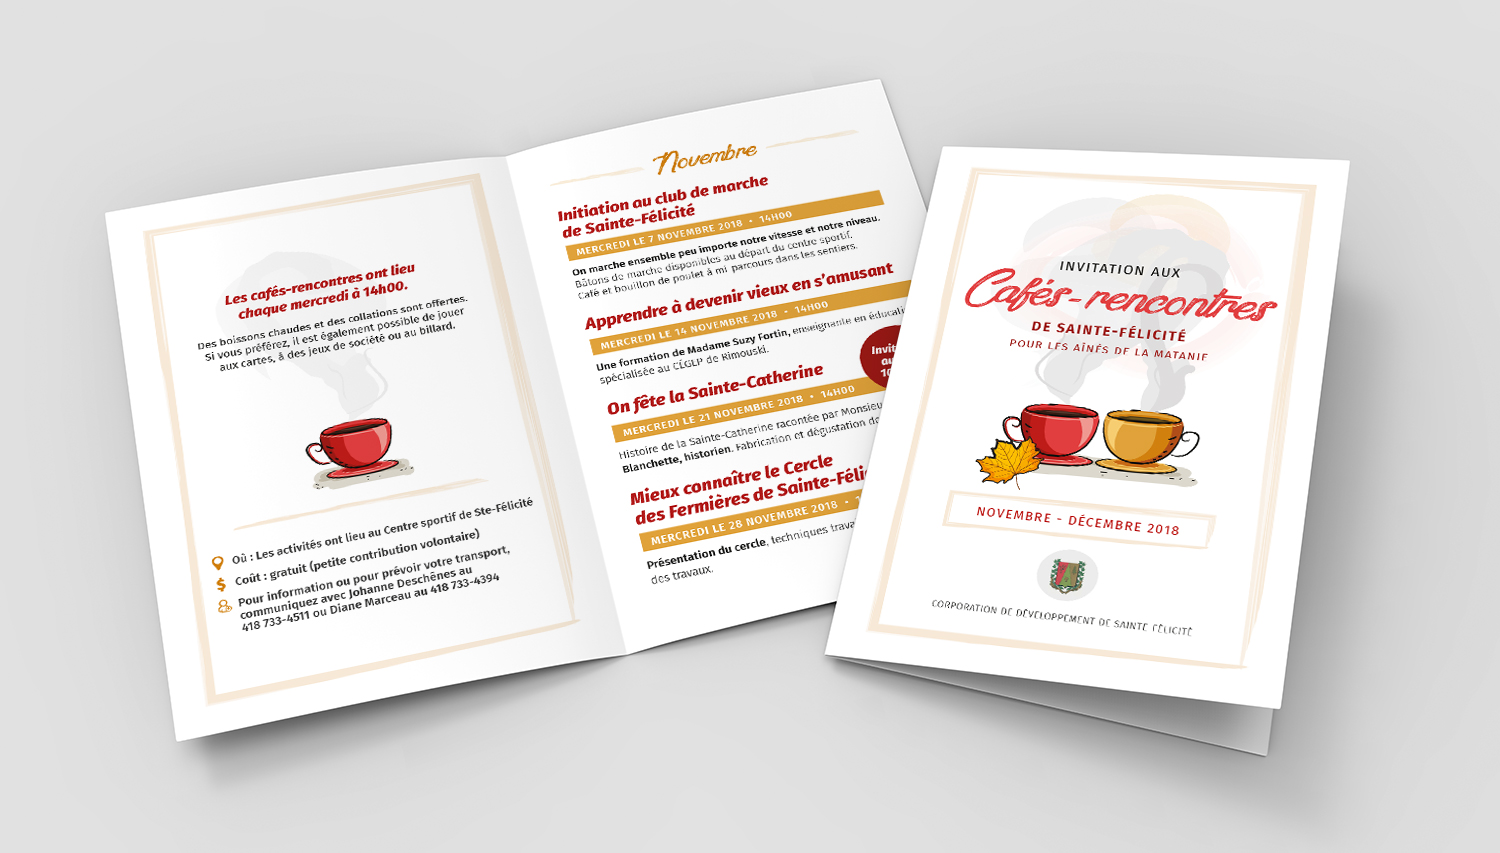 cafes-rencontres-mockup